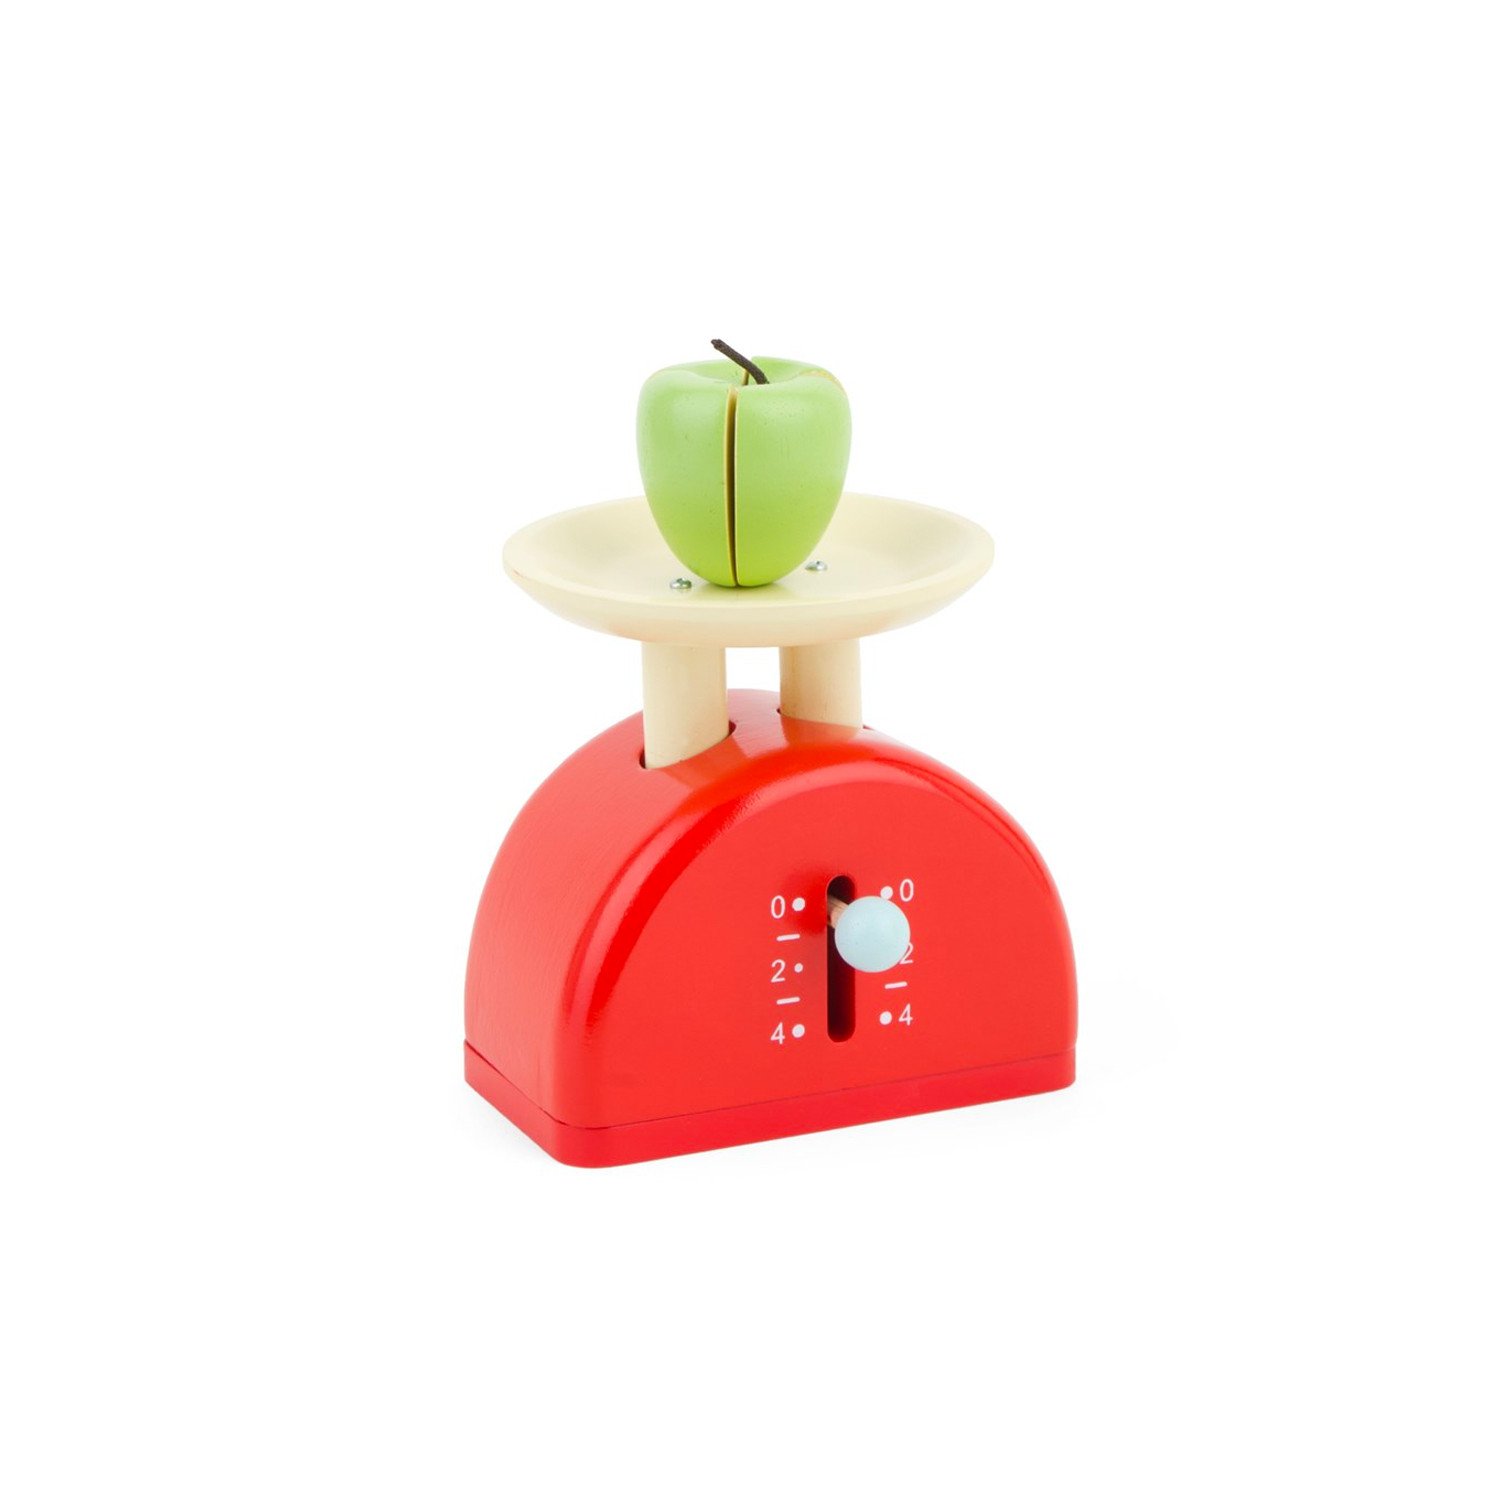 Le Toy Van Weighing Scales - Little Earth Nest